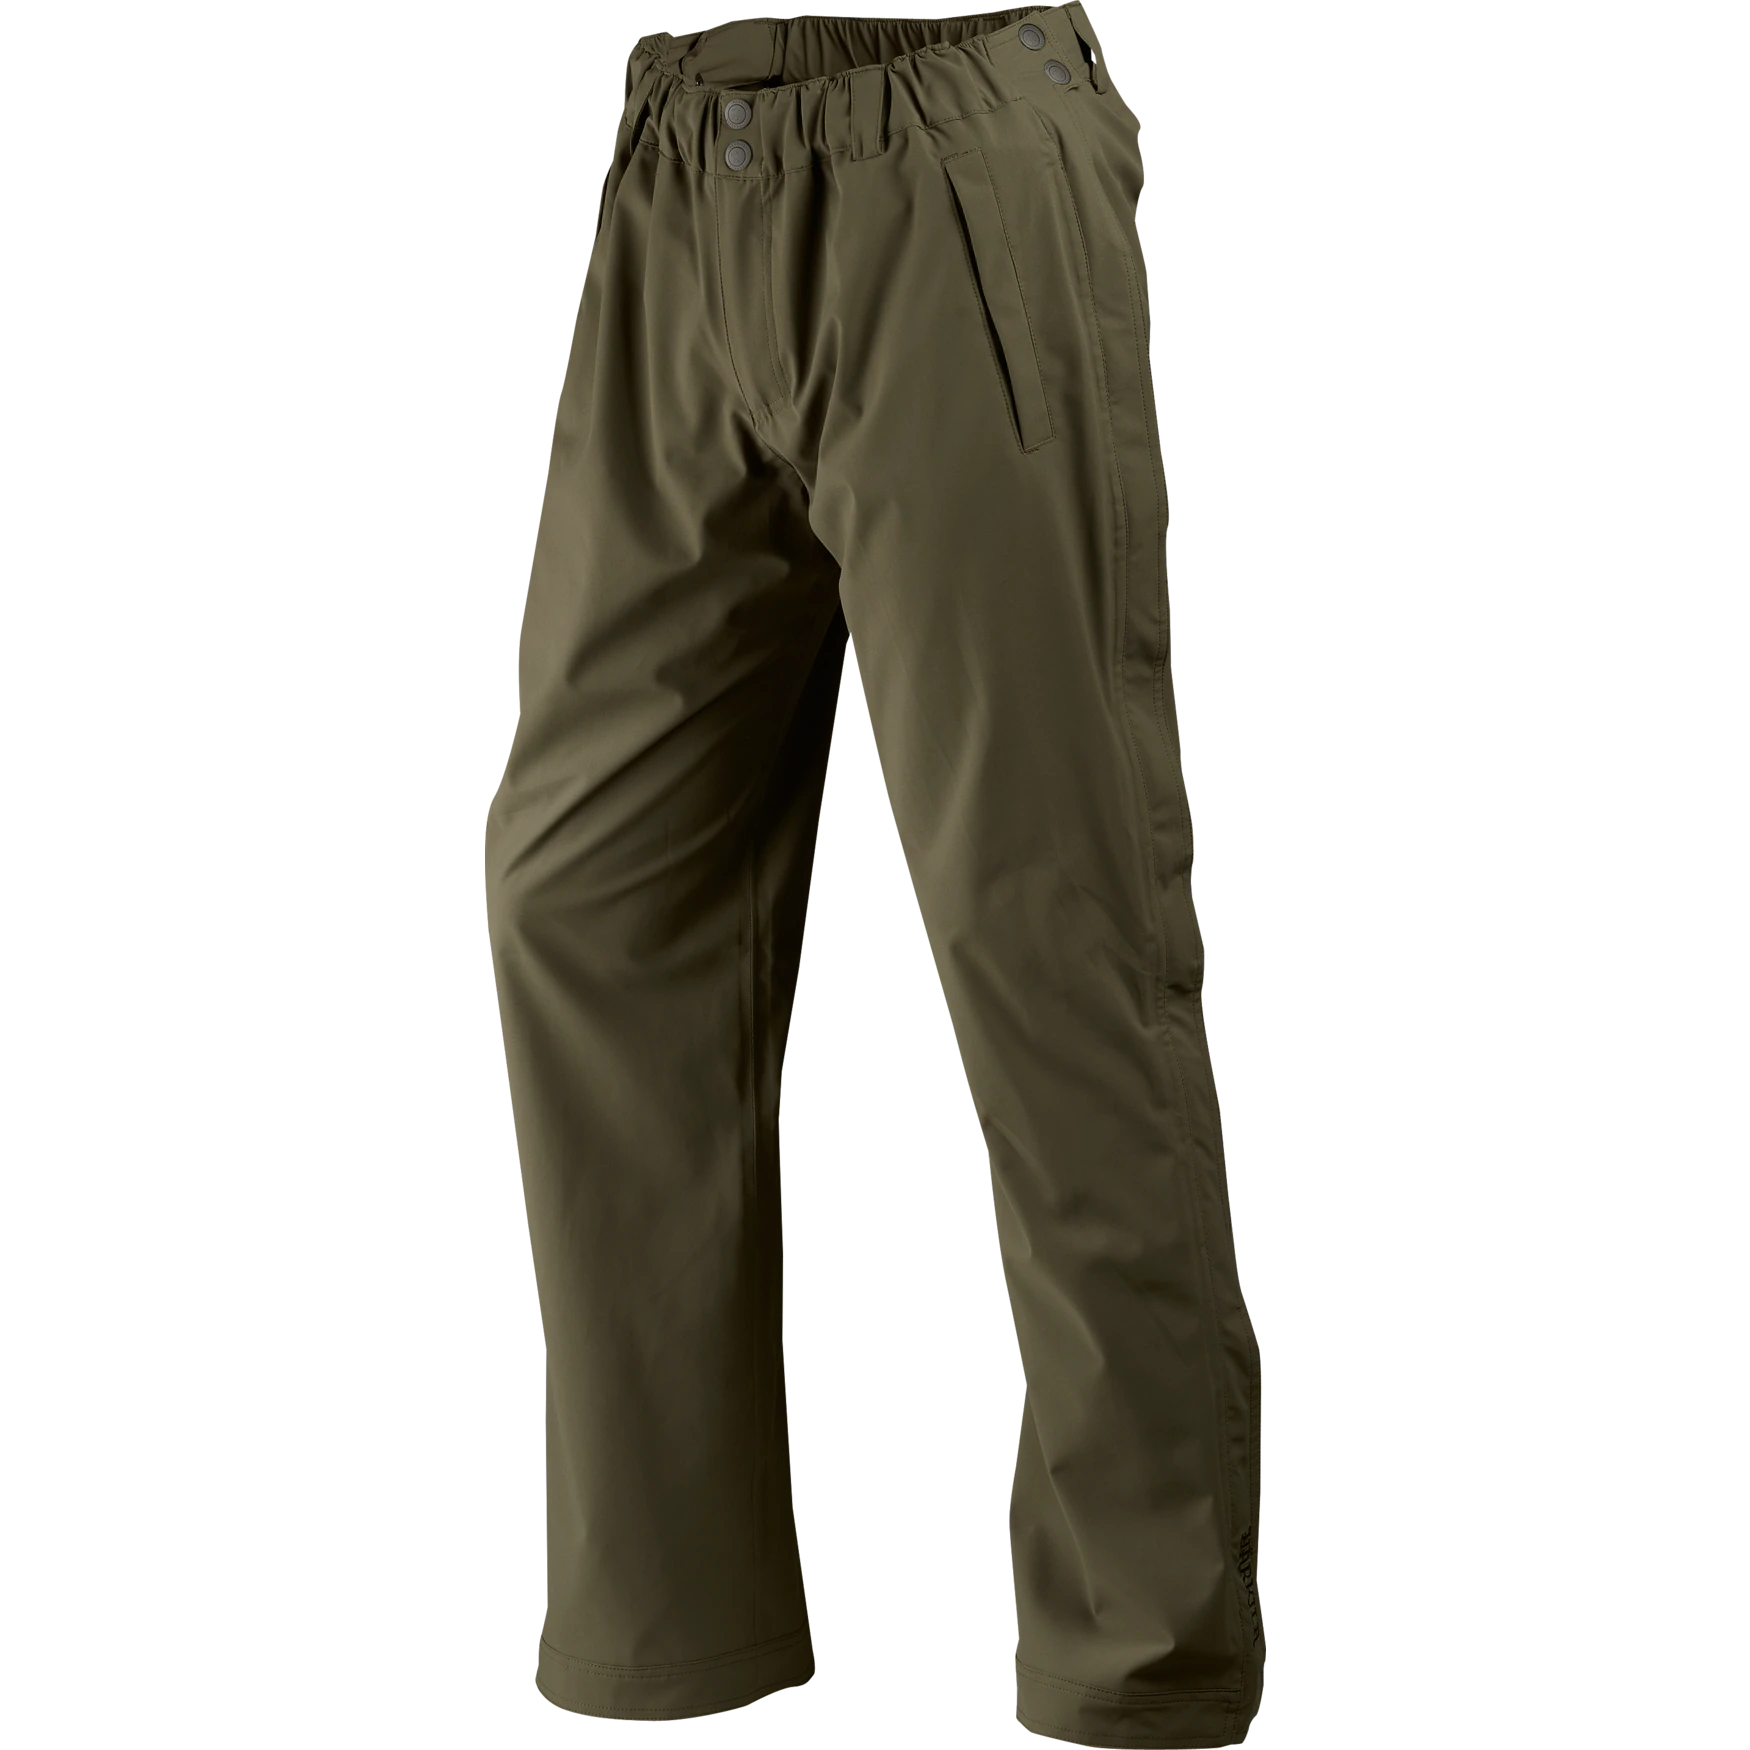 Harkila Orton Overtrousers in Willow Green